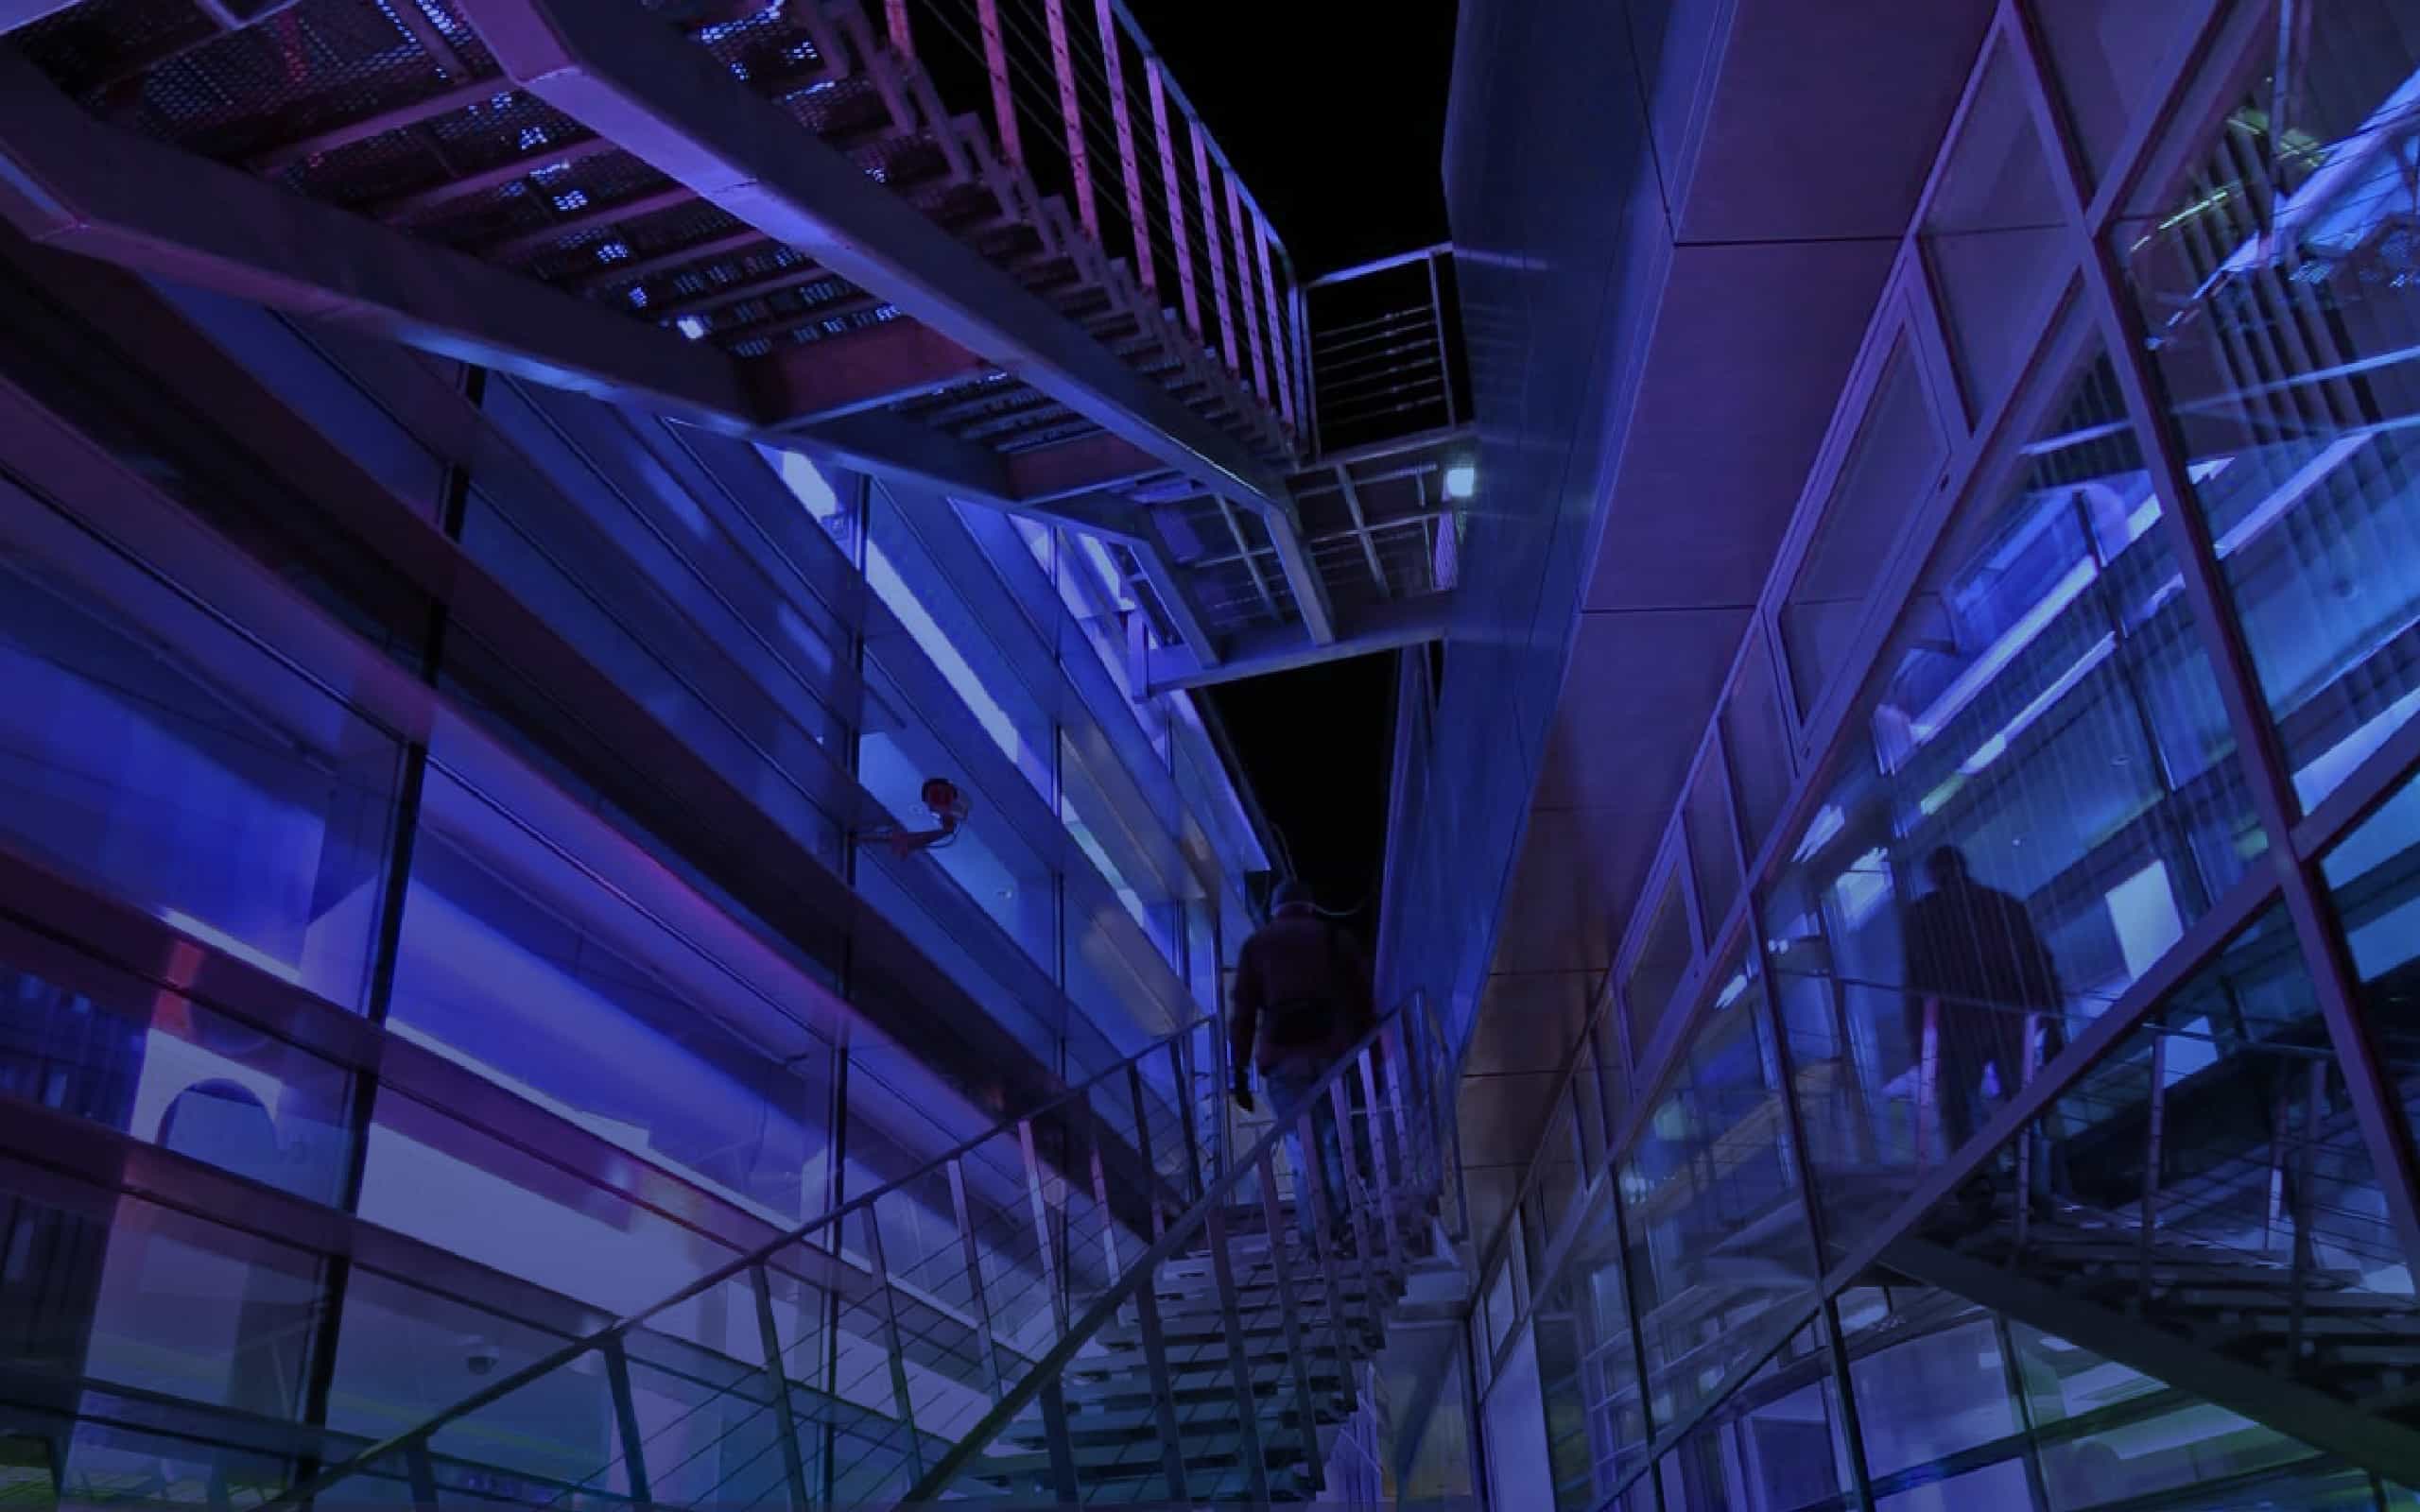 The stairs are lit with purple and blue lights. - 2560x1600